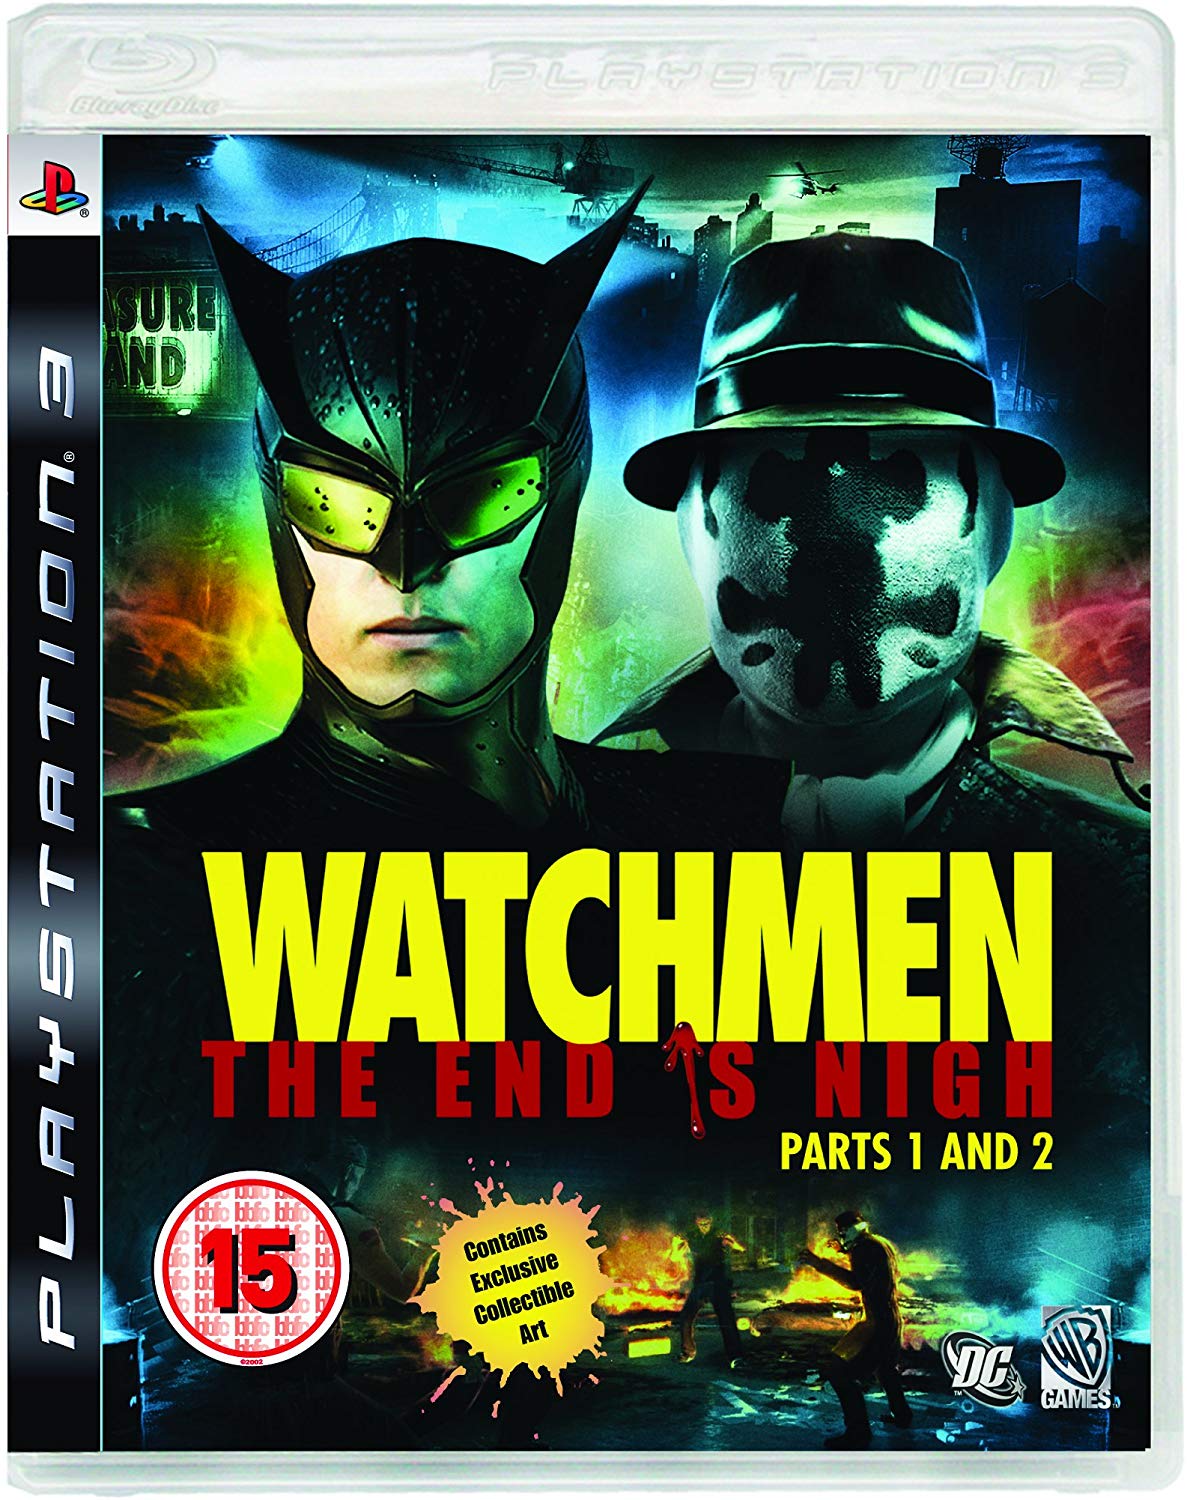 Watchmen The End Is Nigh (Parts 1 and 2)